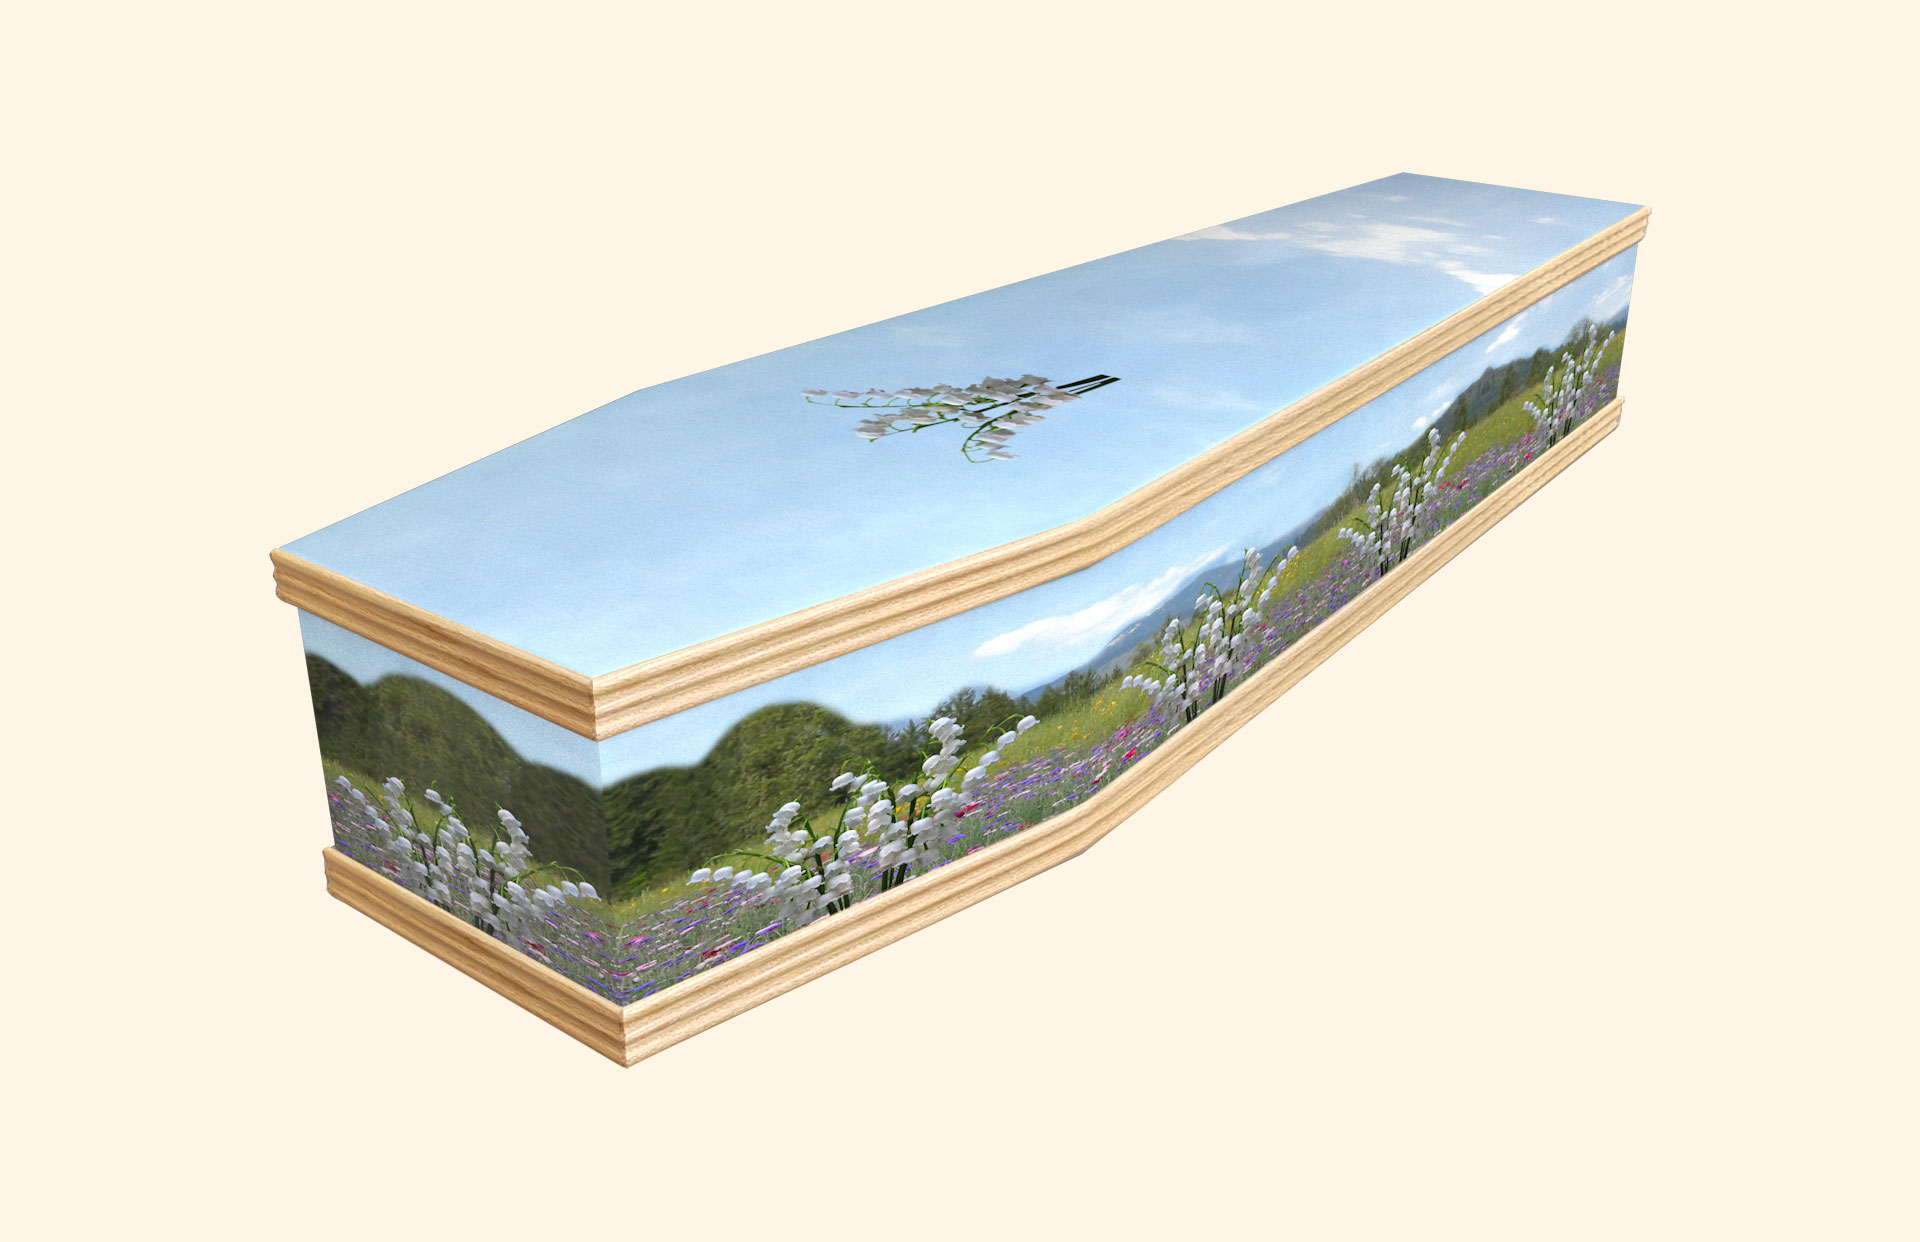 Lily of the Valley design on a classic coffin